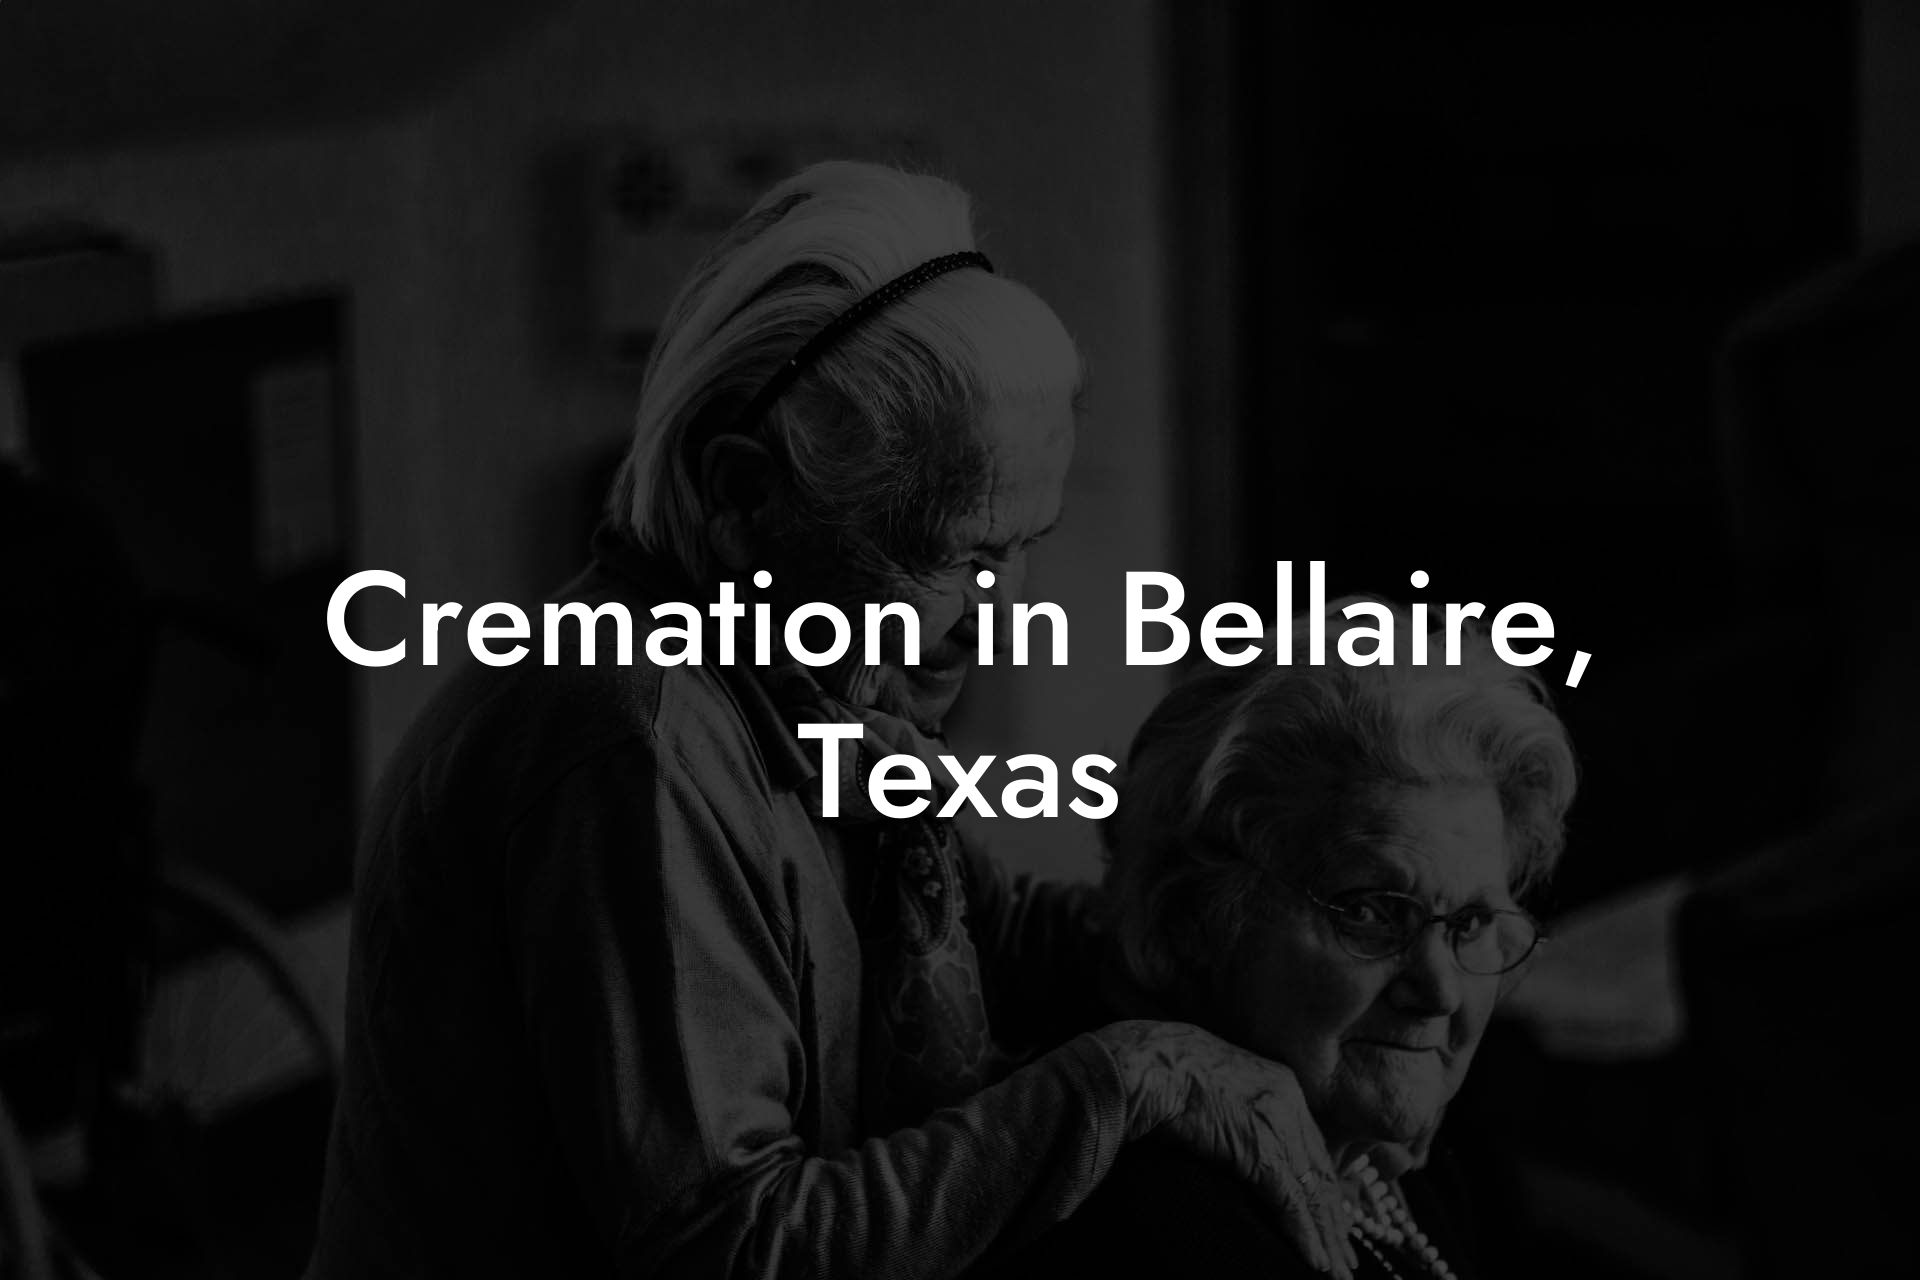 Cremation in Bellaire, Texas